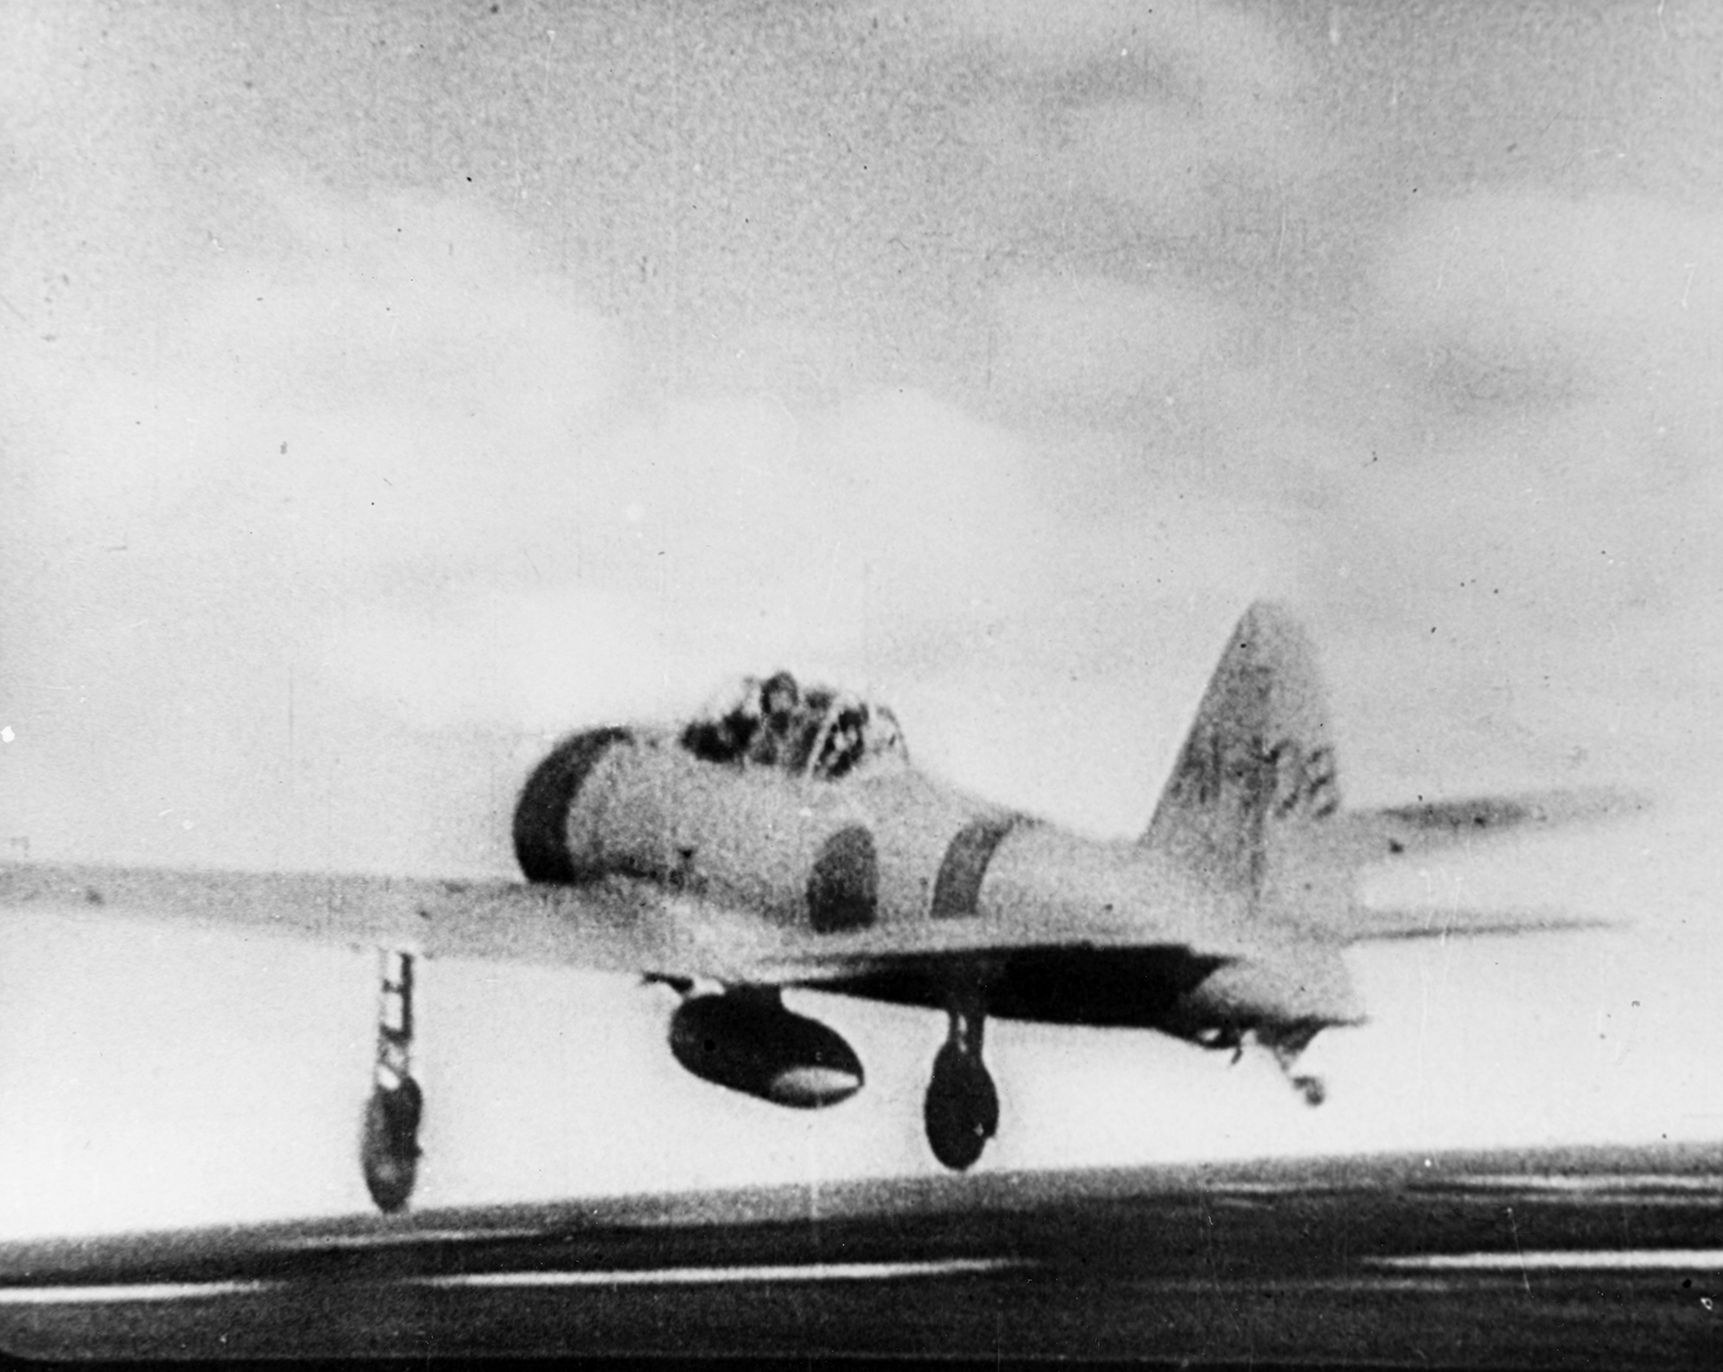 On the morning of December 7, 1941, a Mitsubishi Zero fighter, tail number A1-108, takes off from the aircraft carrier Akagi en route to attack Pearl Harbor and other American military installations on the island of Oahu. For a short time, the nimble Zero dominated the skies during the Pacific War.